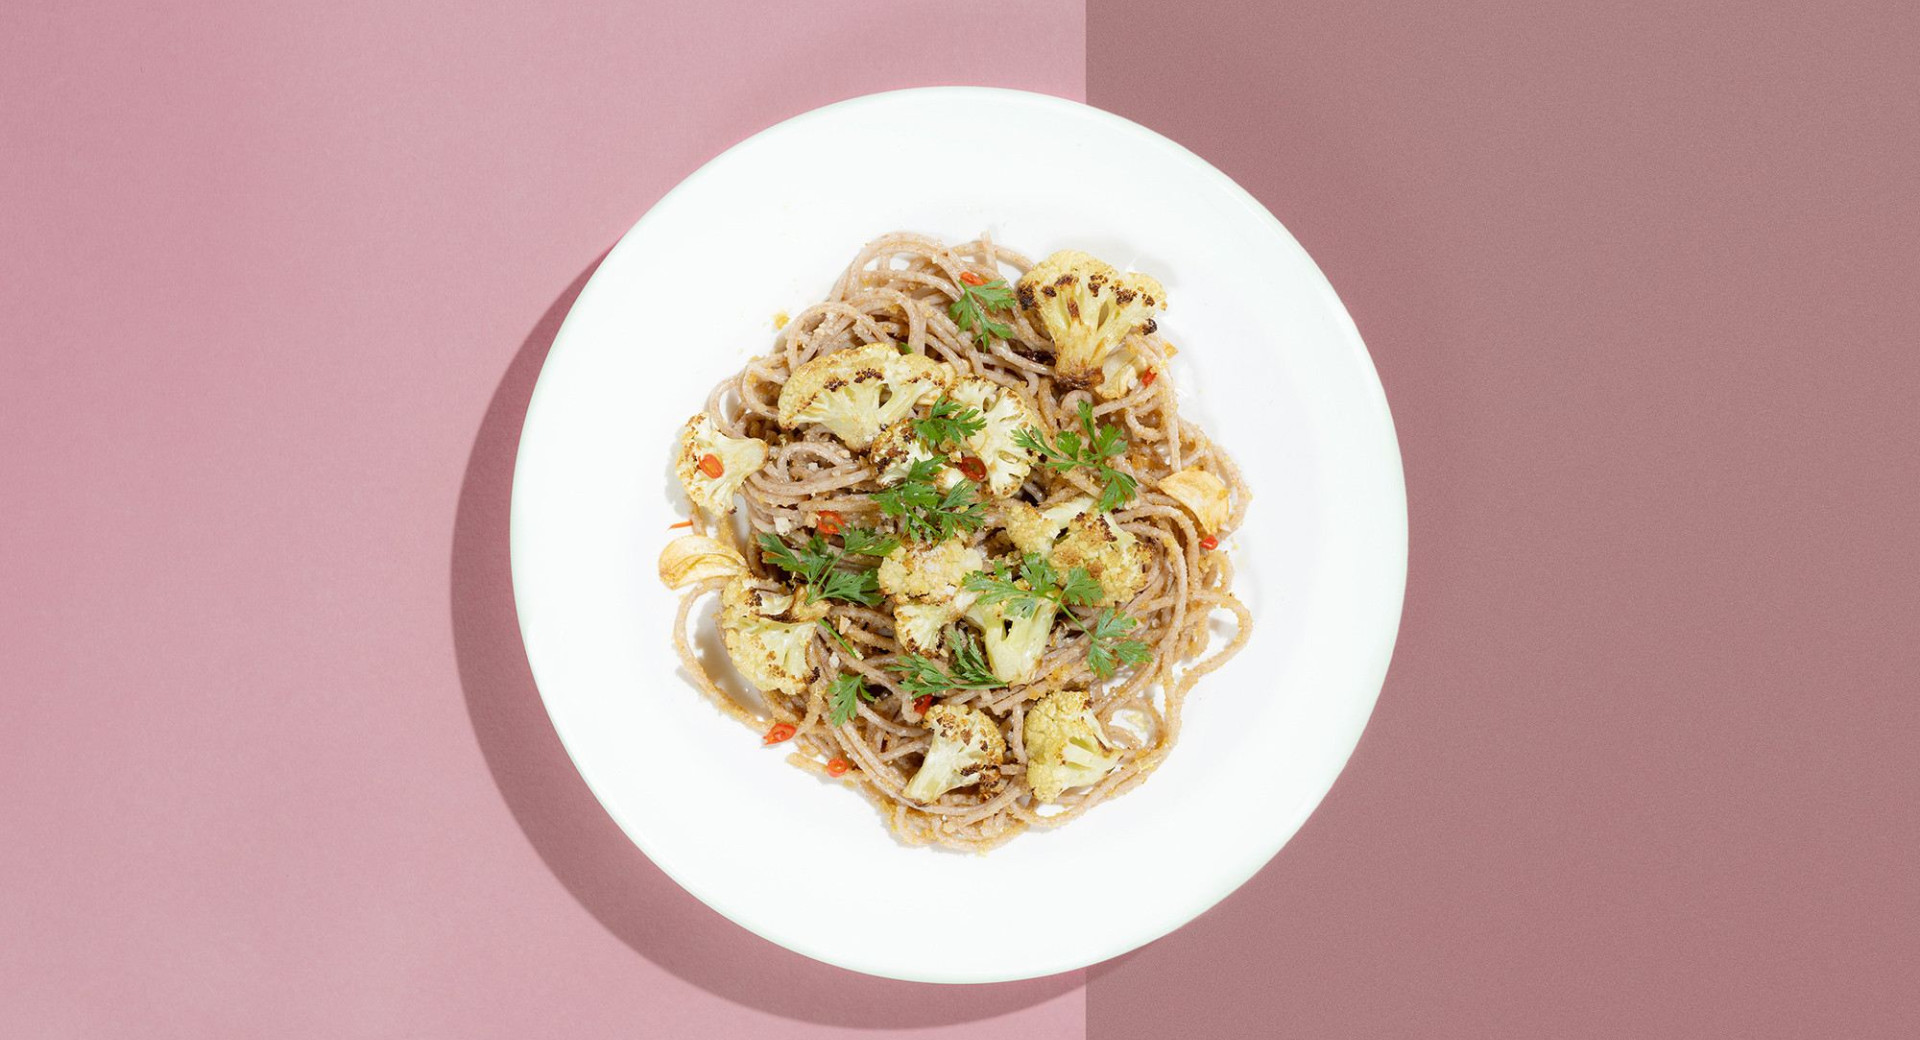 A white plate on a light and dark pink background. On the plate, there's a mound of spaghetti decorated with cauliflower florets and parsley.